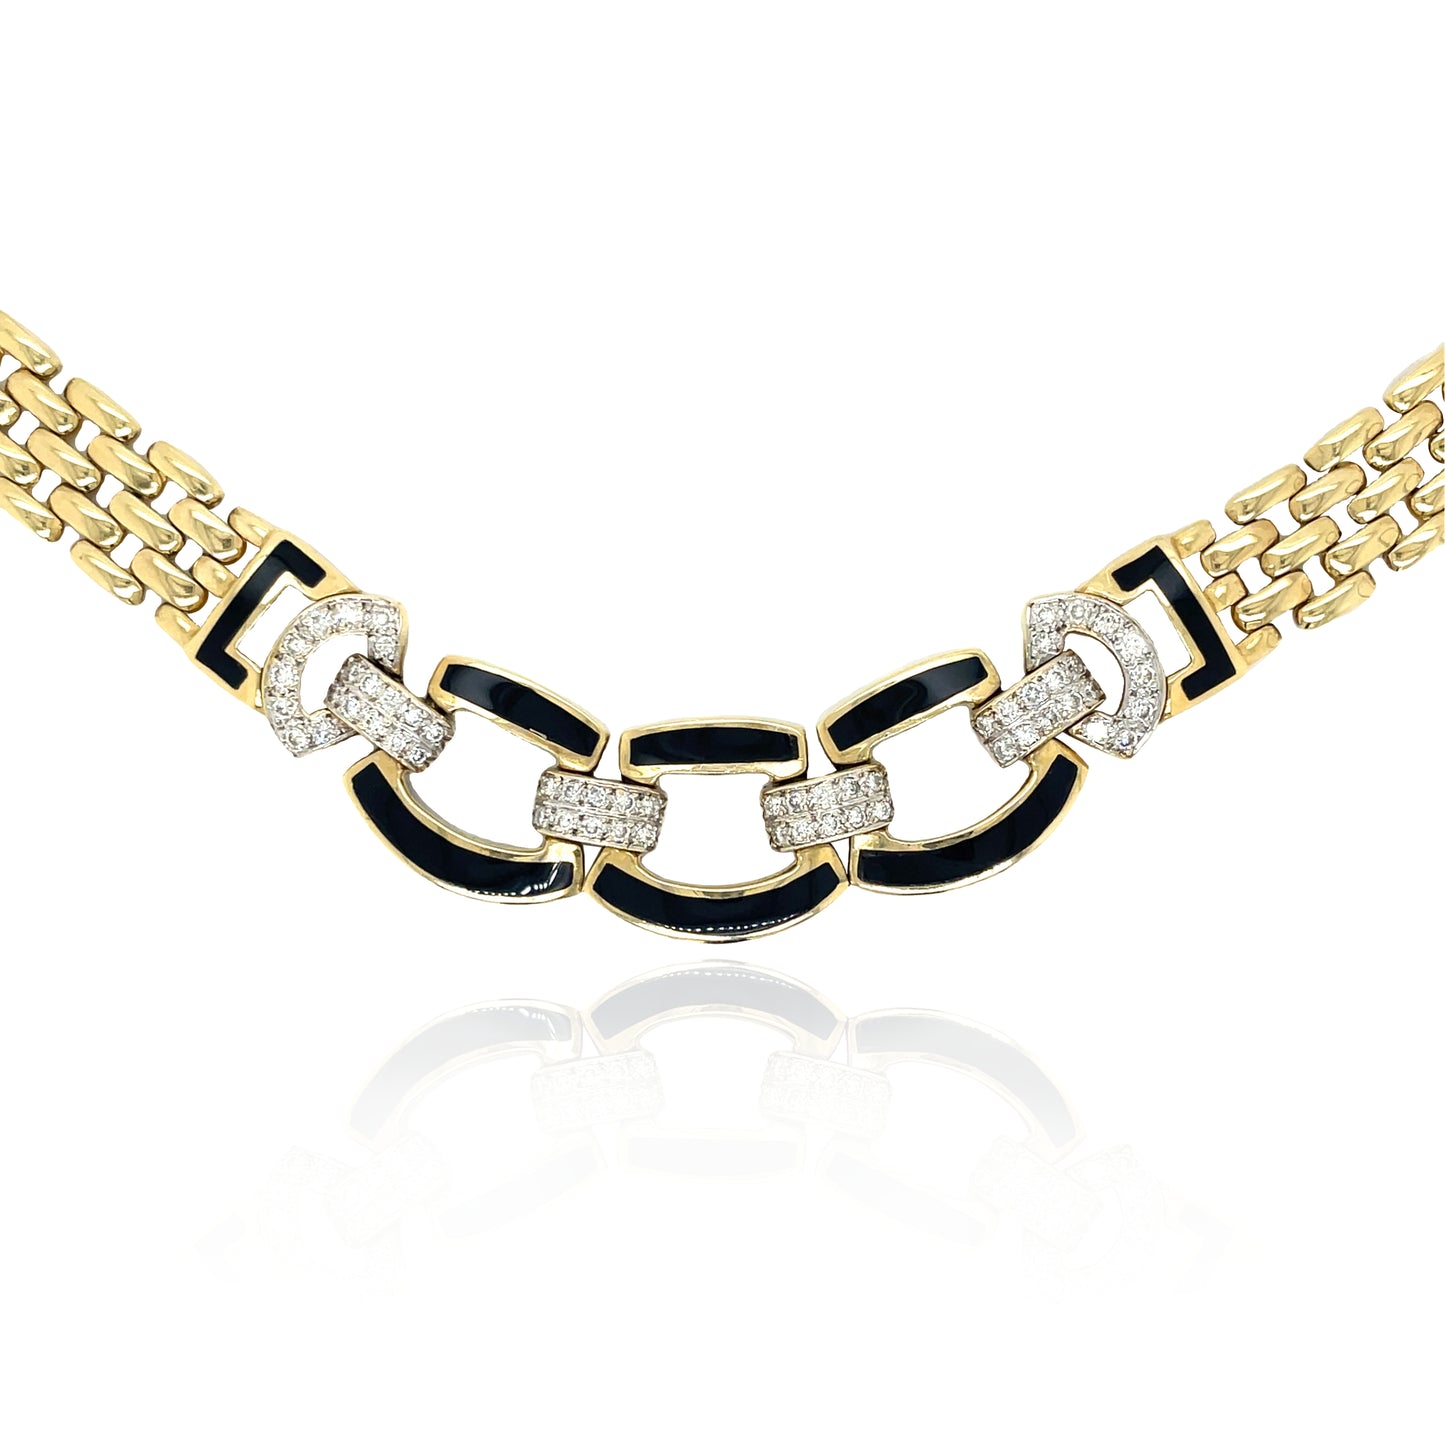 Estate 14k Yellow Gold Panther Link Necklace with Diamonds and Black Onyx